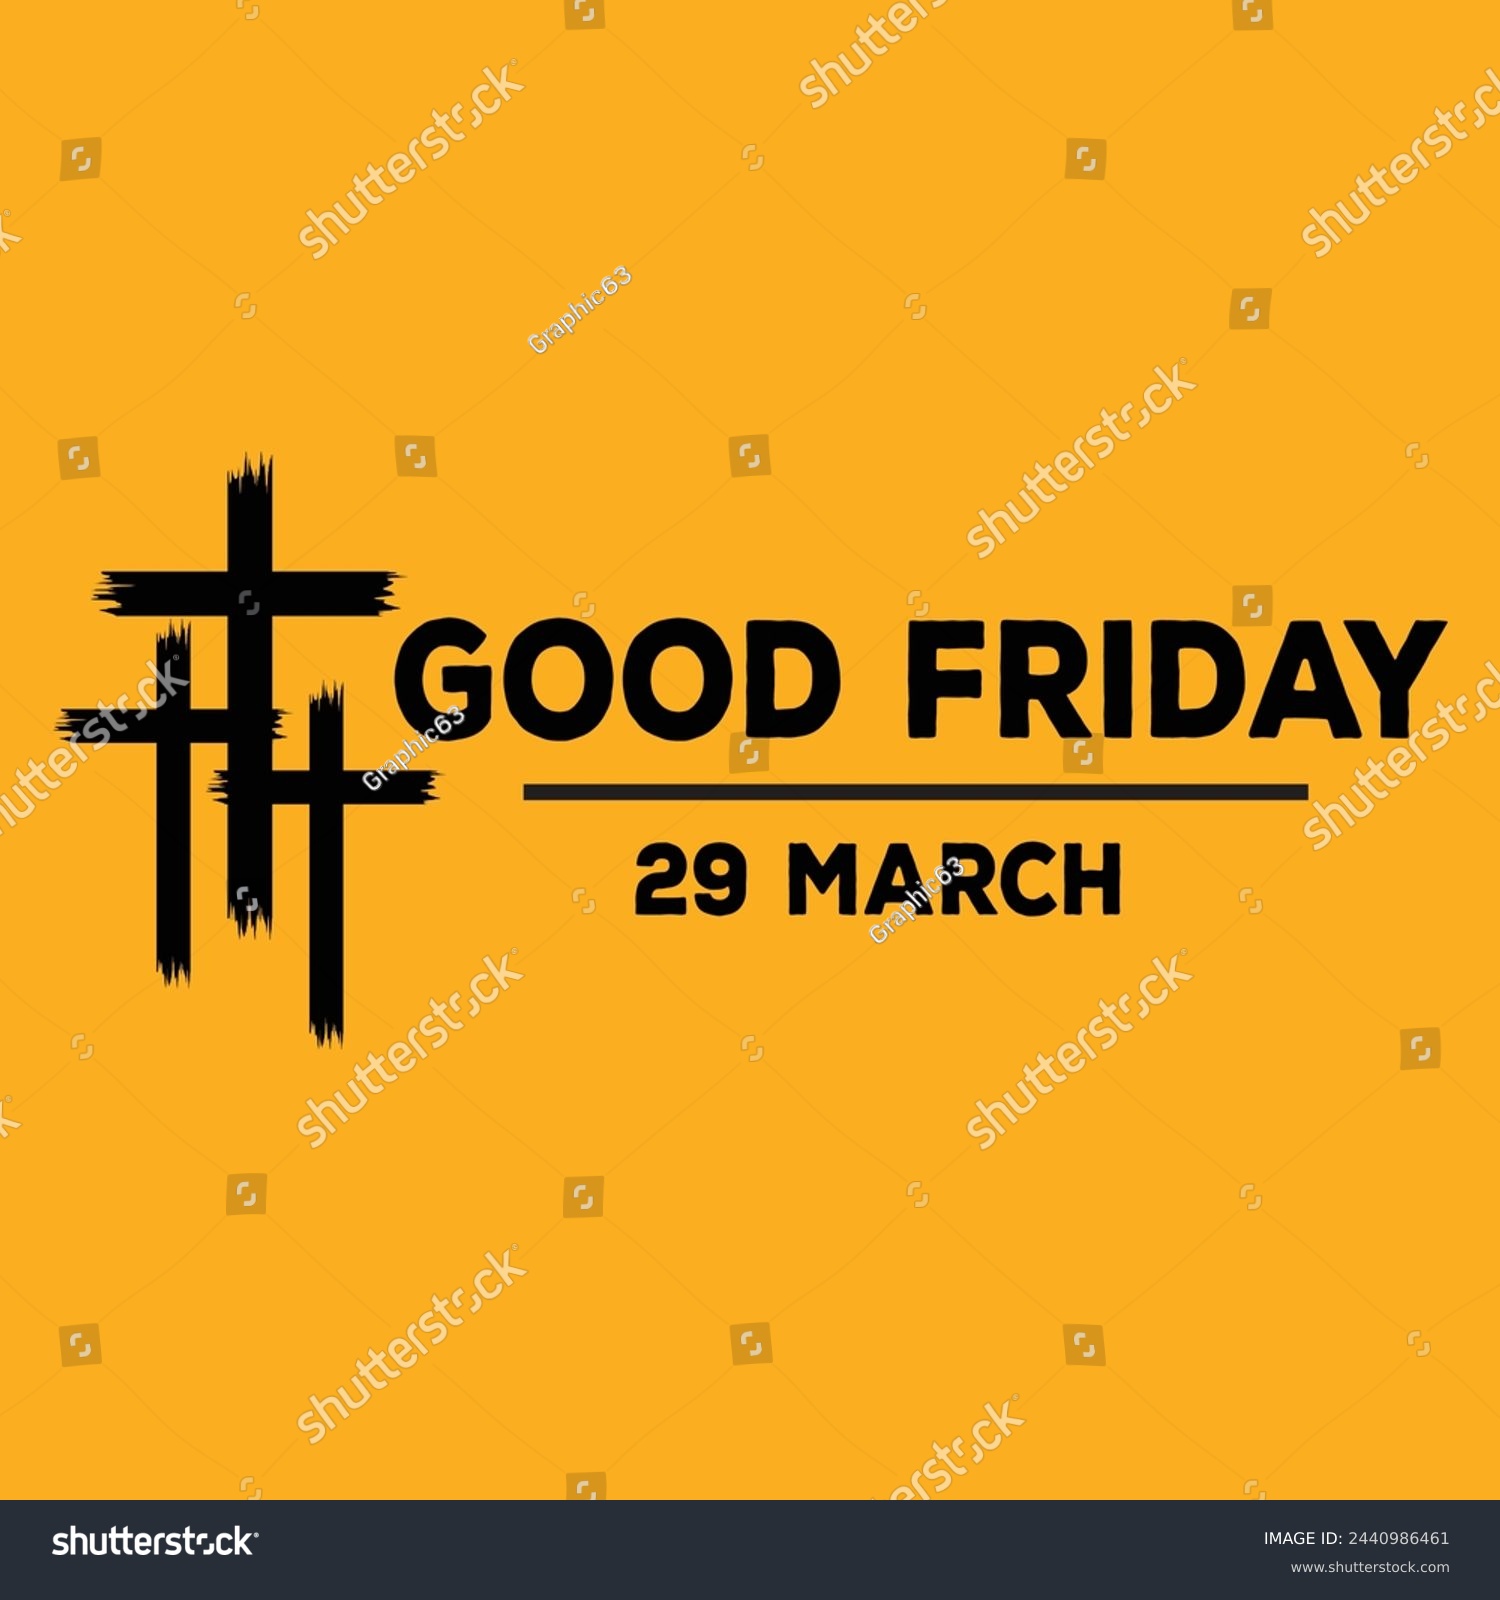 SVG of Good Friday 29 March.Motivational Typography Quotes Print For T Shirt, Poster, Design Vector Illustration. svg